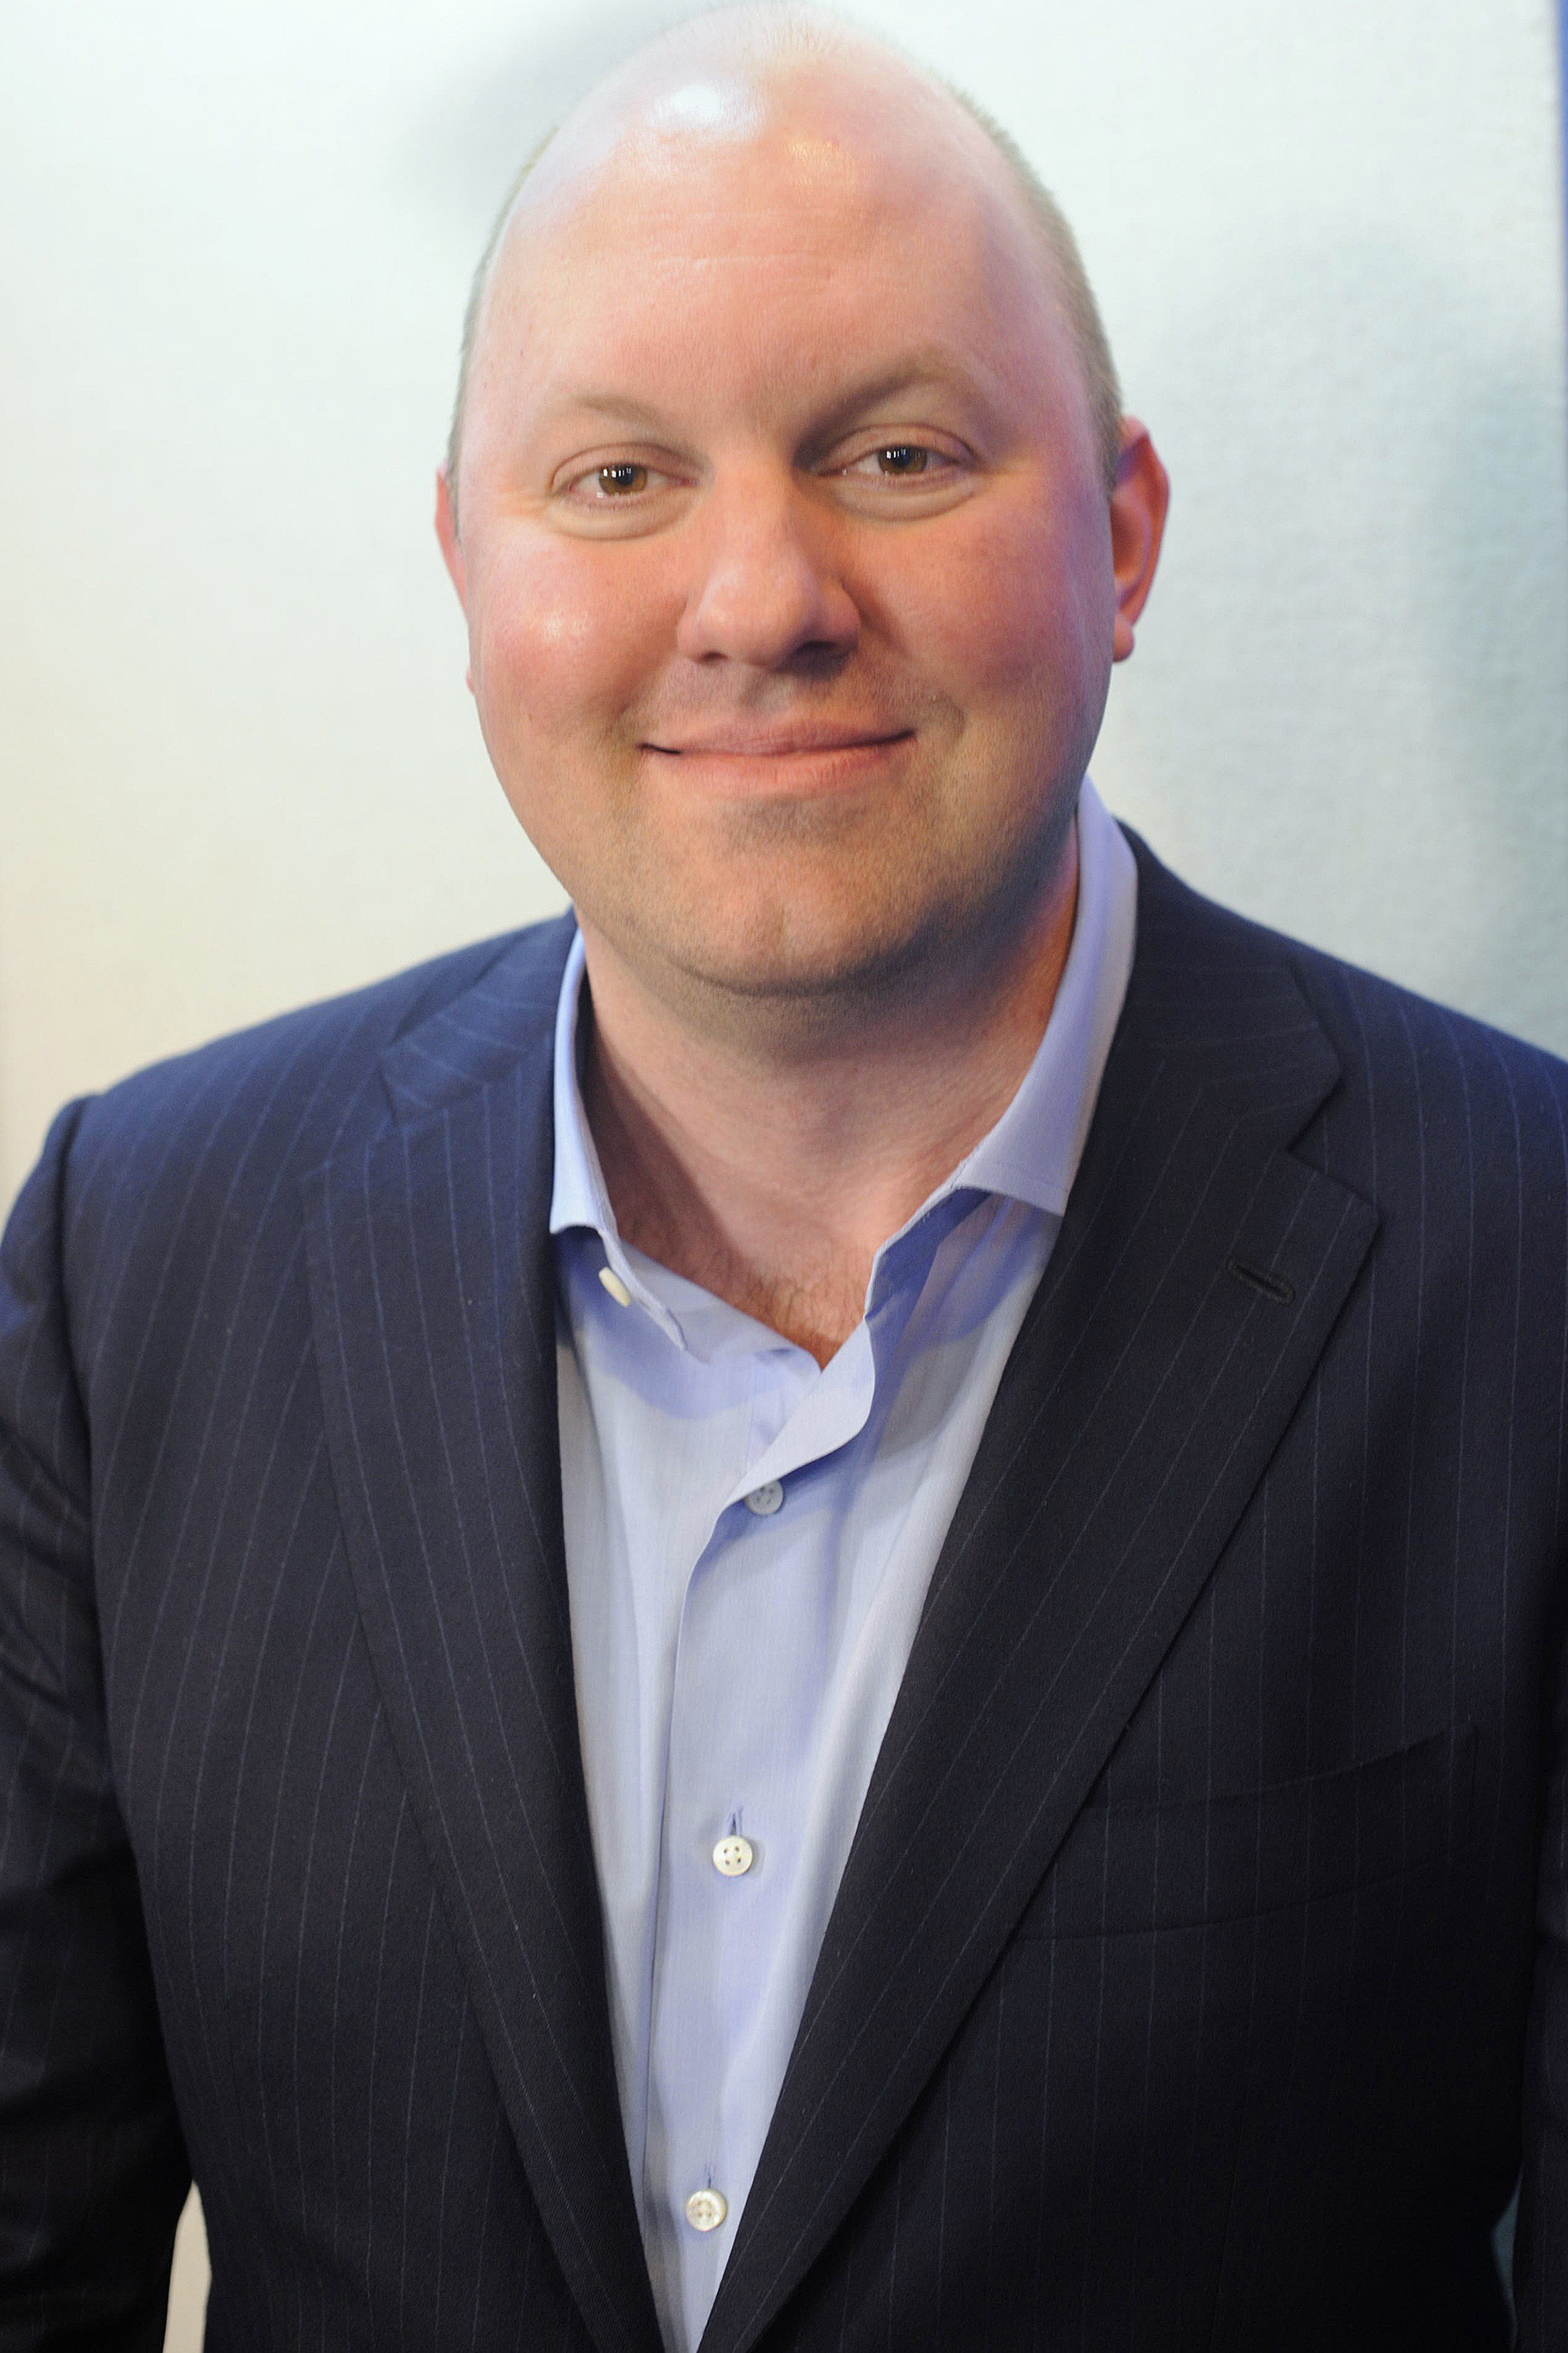 Marc Andreessen, co-founder of Netscape and venture capitalist, sits for a portrait during an interview in New York